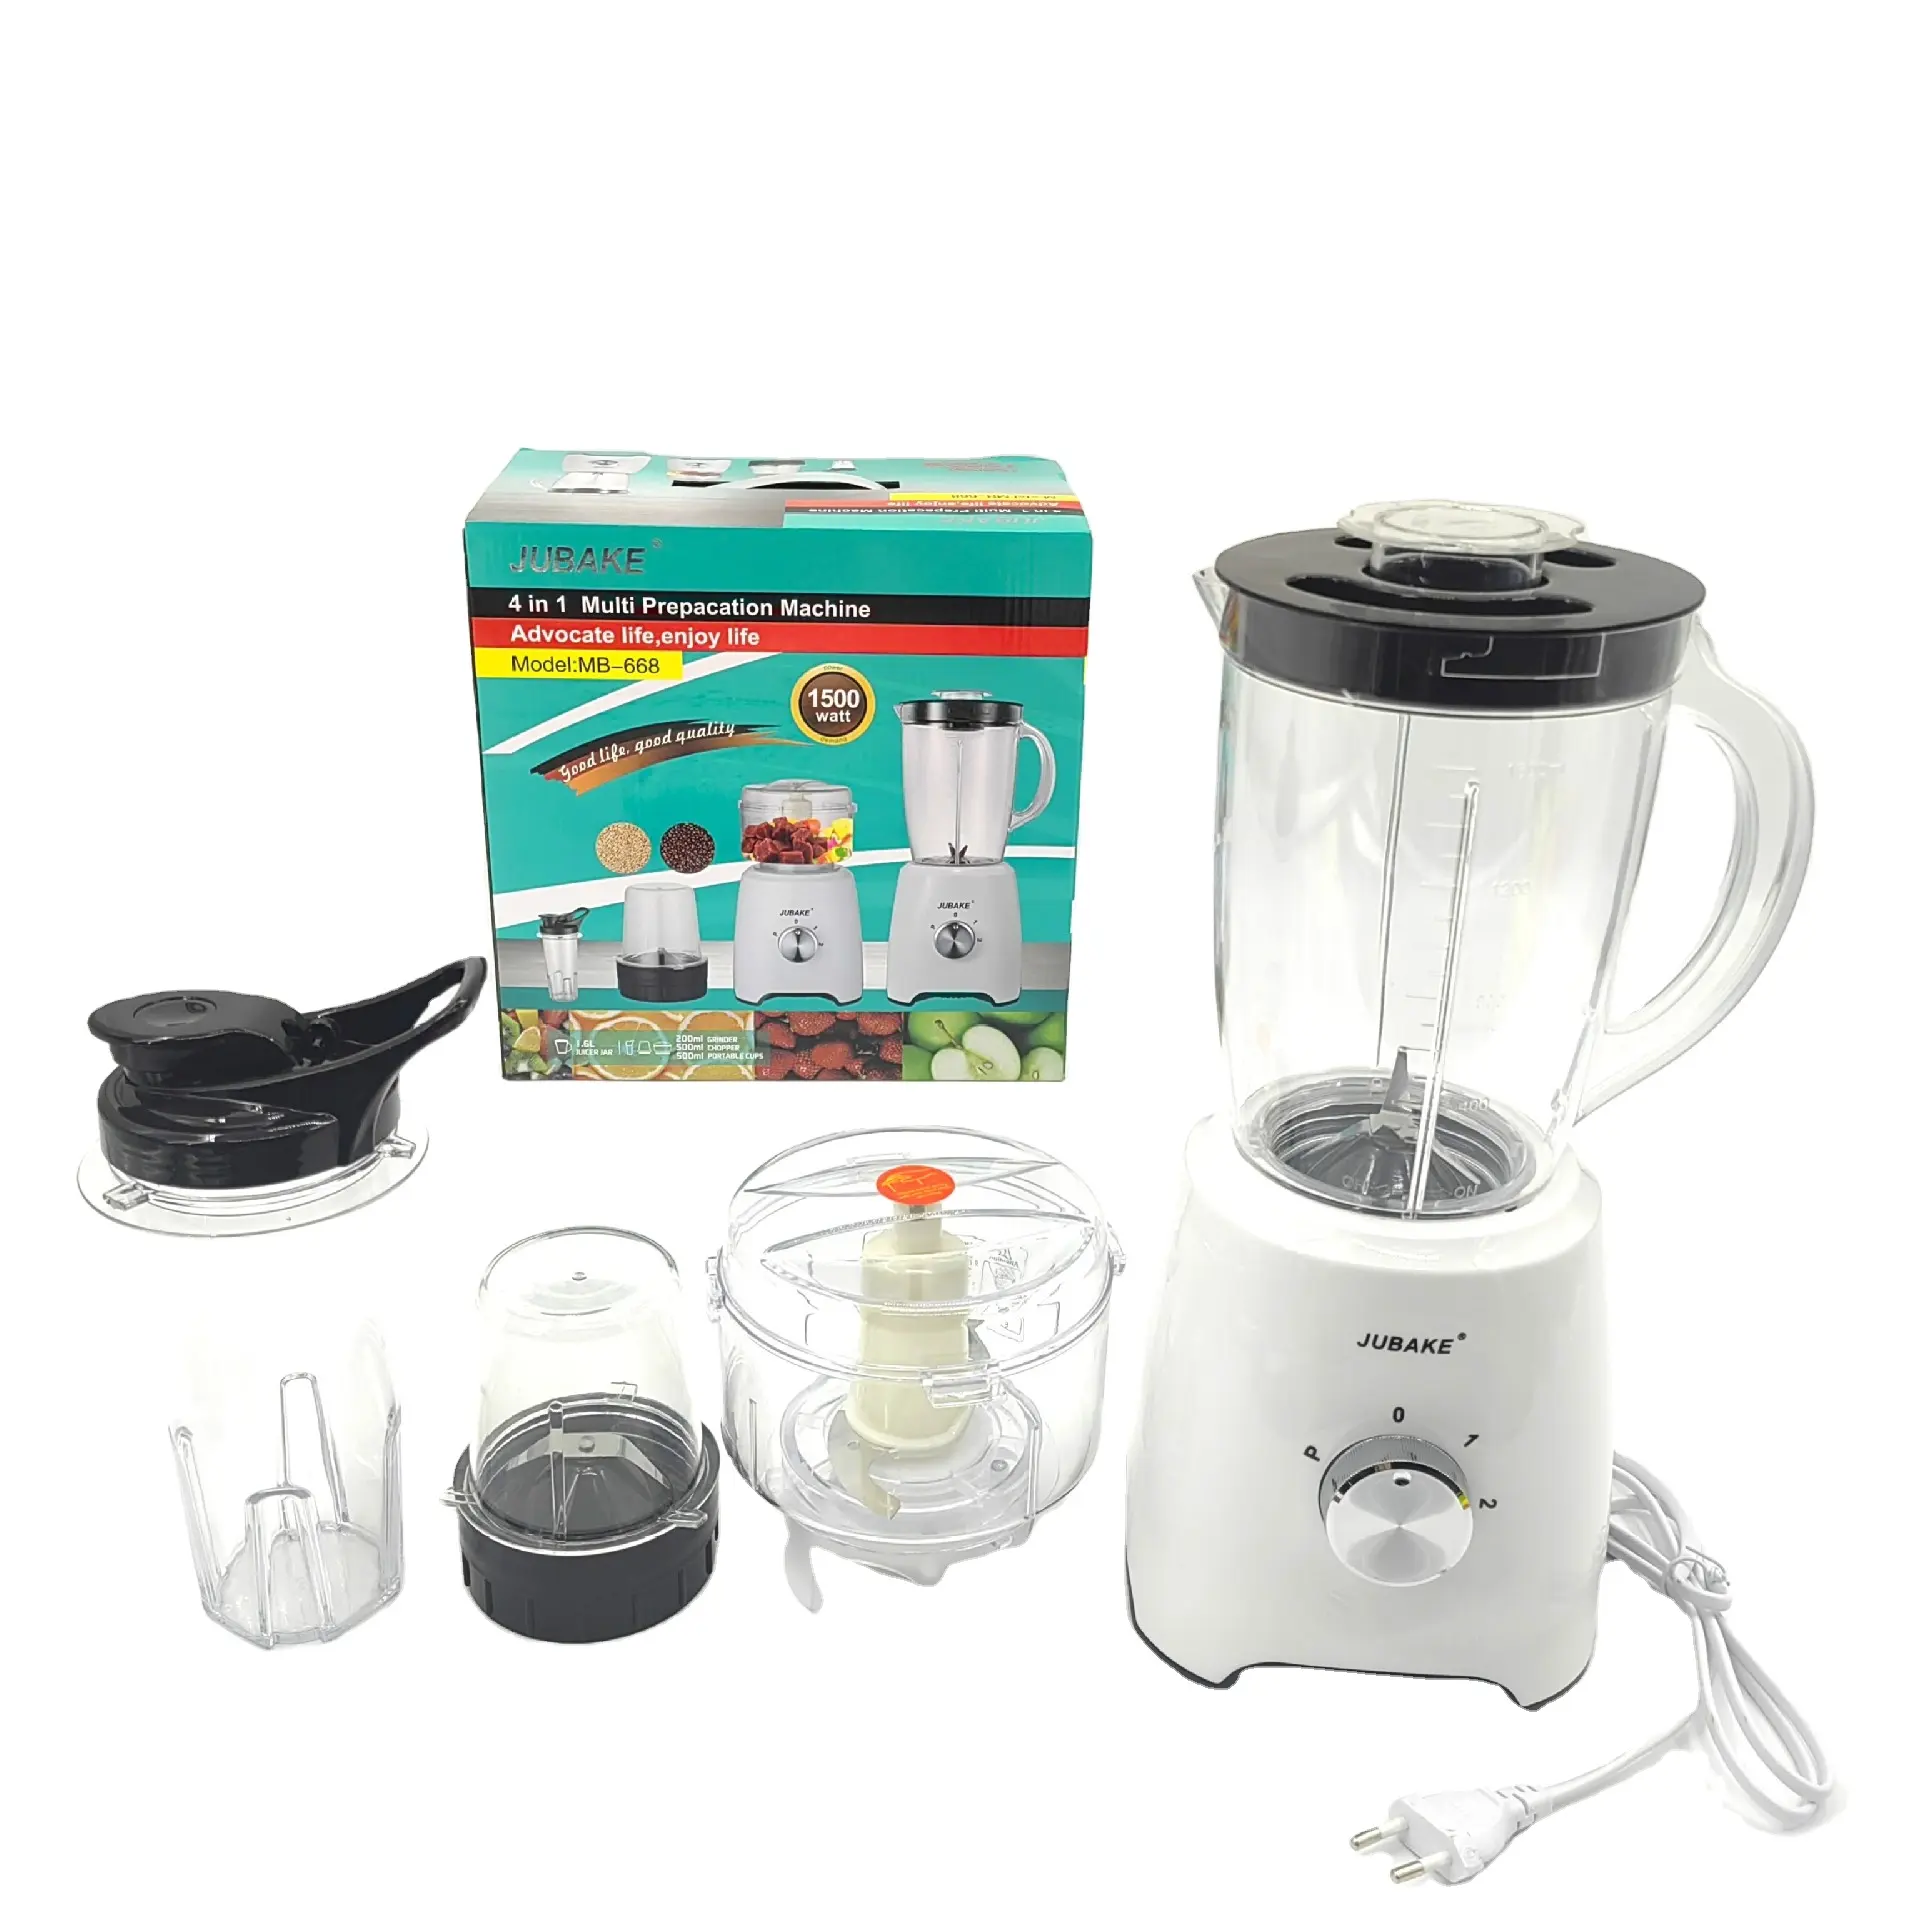 New Home Kitchen Use Three in One Multi Mixer, High Speed Electric Grinding Machine, Chopper, Juicer, Mixer